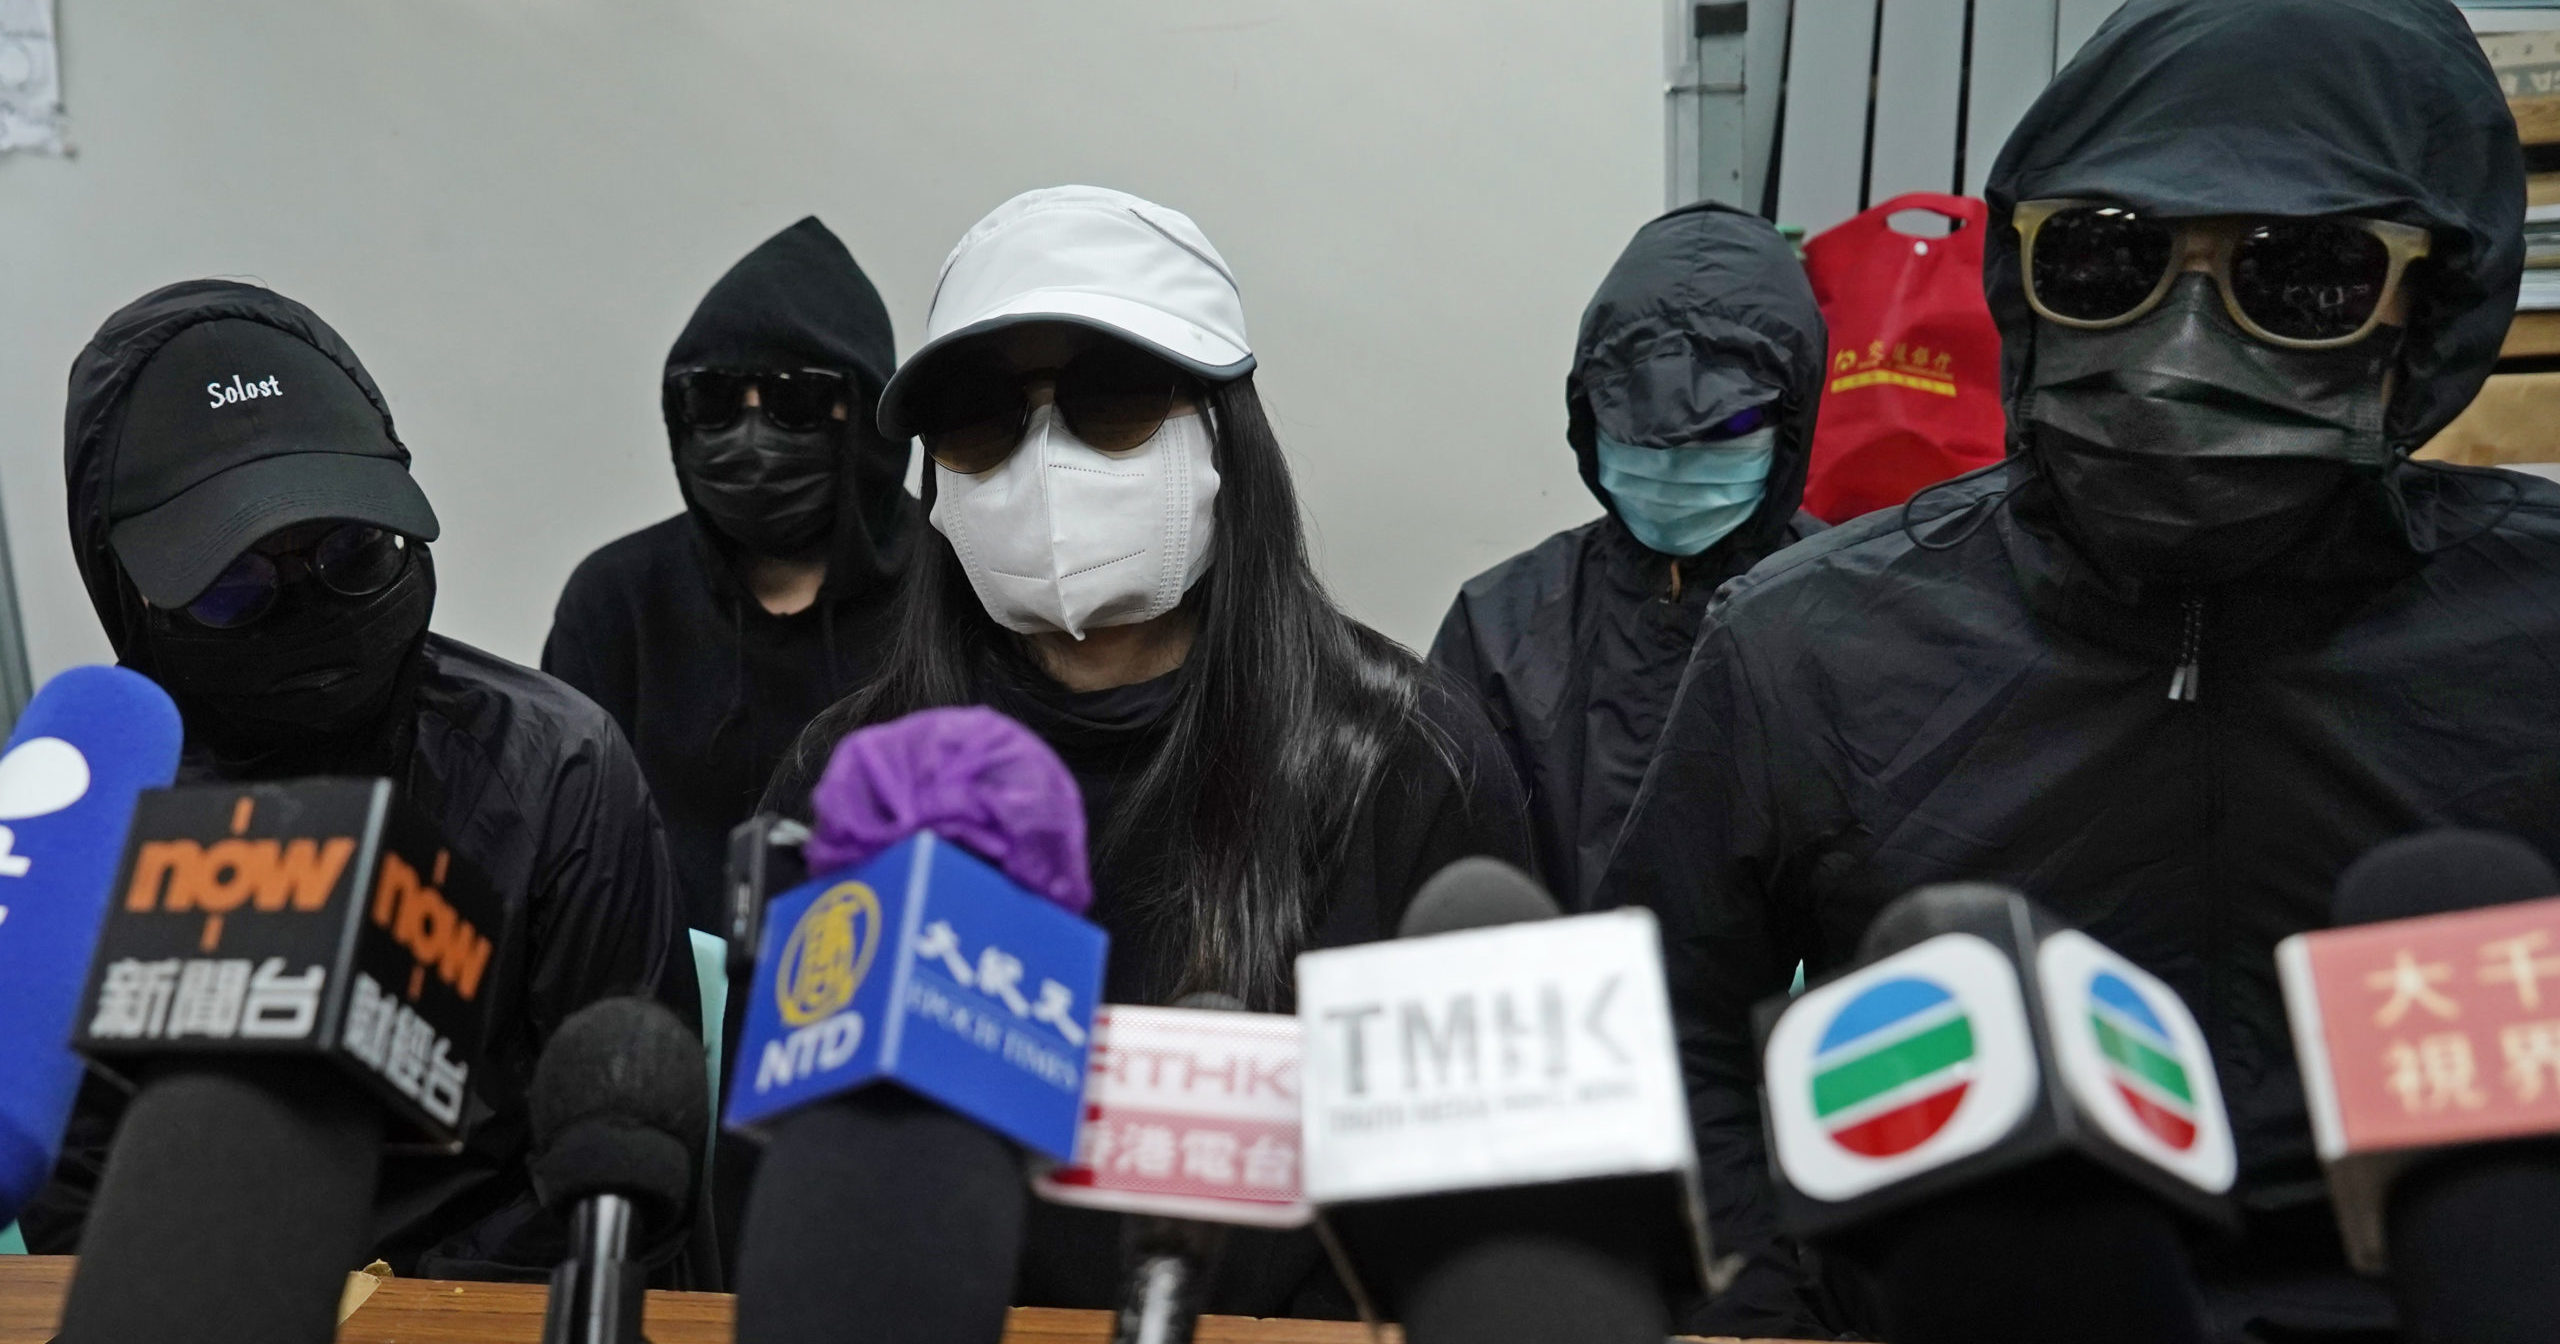 Relatives of 12 Hong Kong activists detained at sea by Chinese authorities attend a news conference in Hong Kong on Dec. 28, 2020.